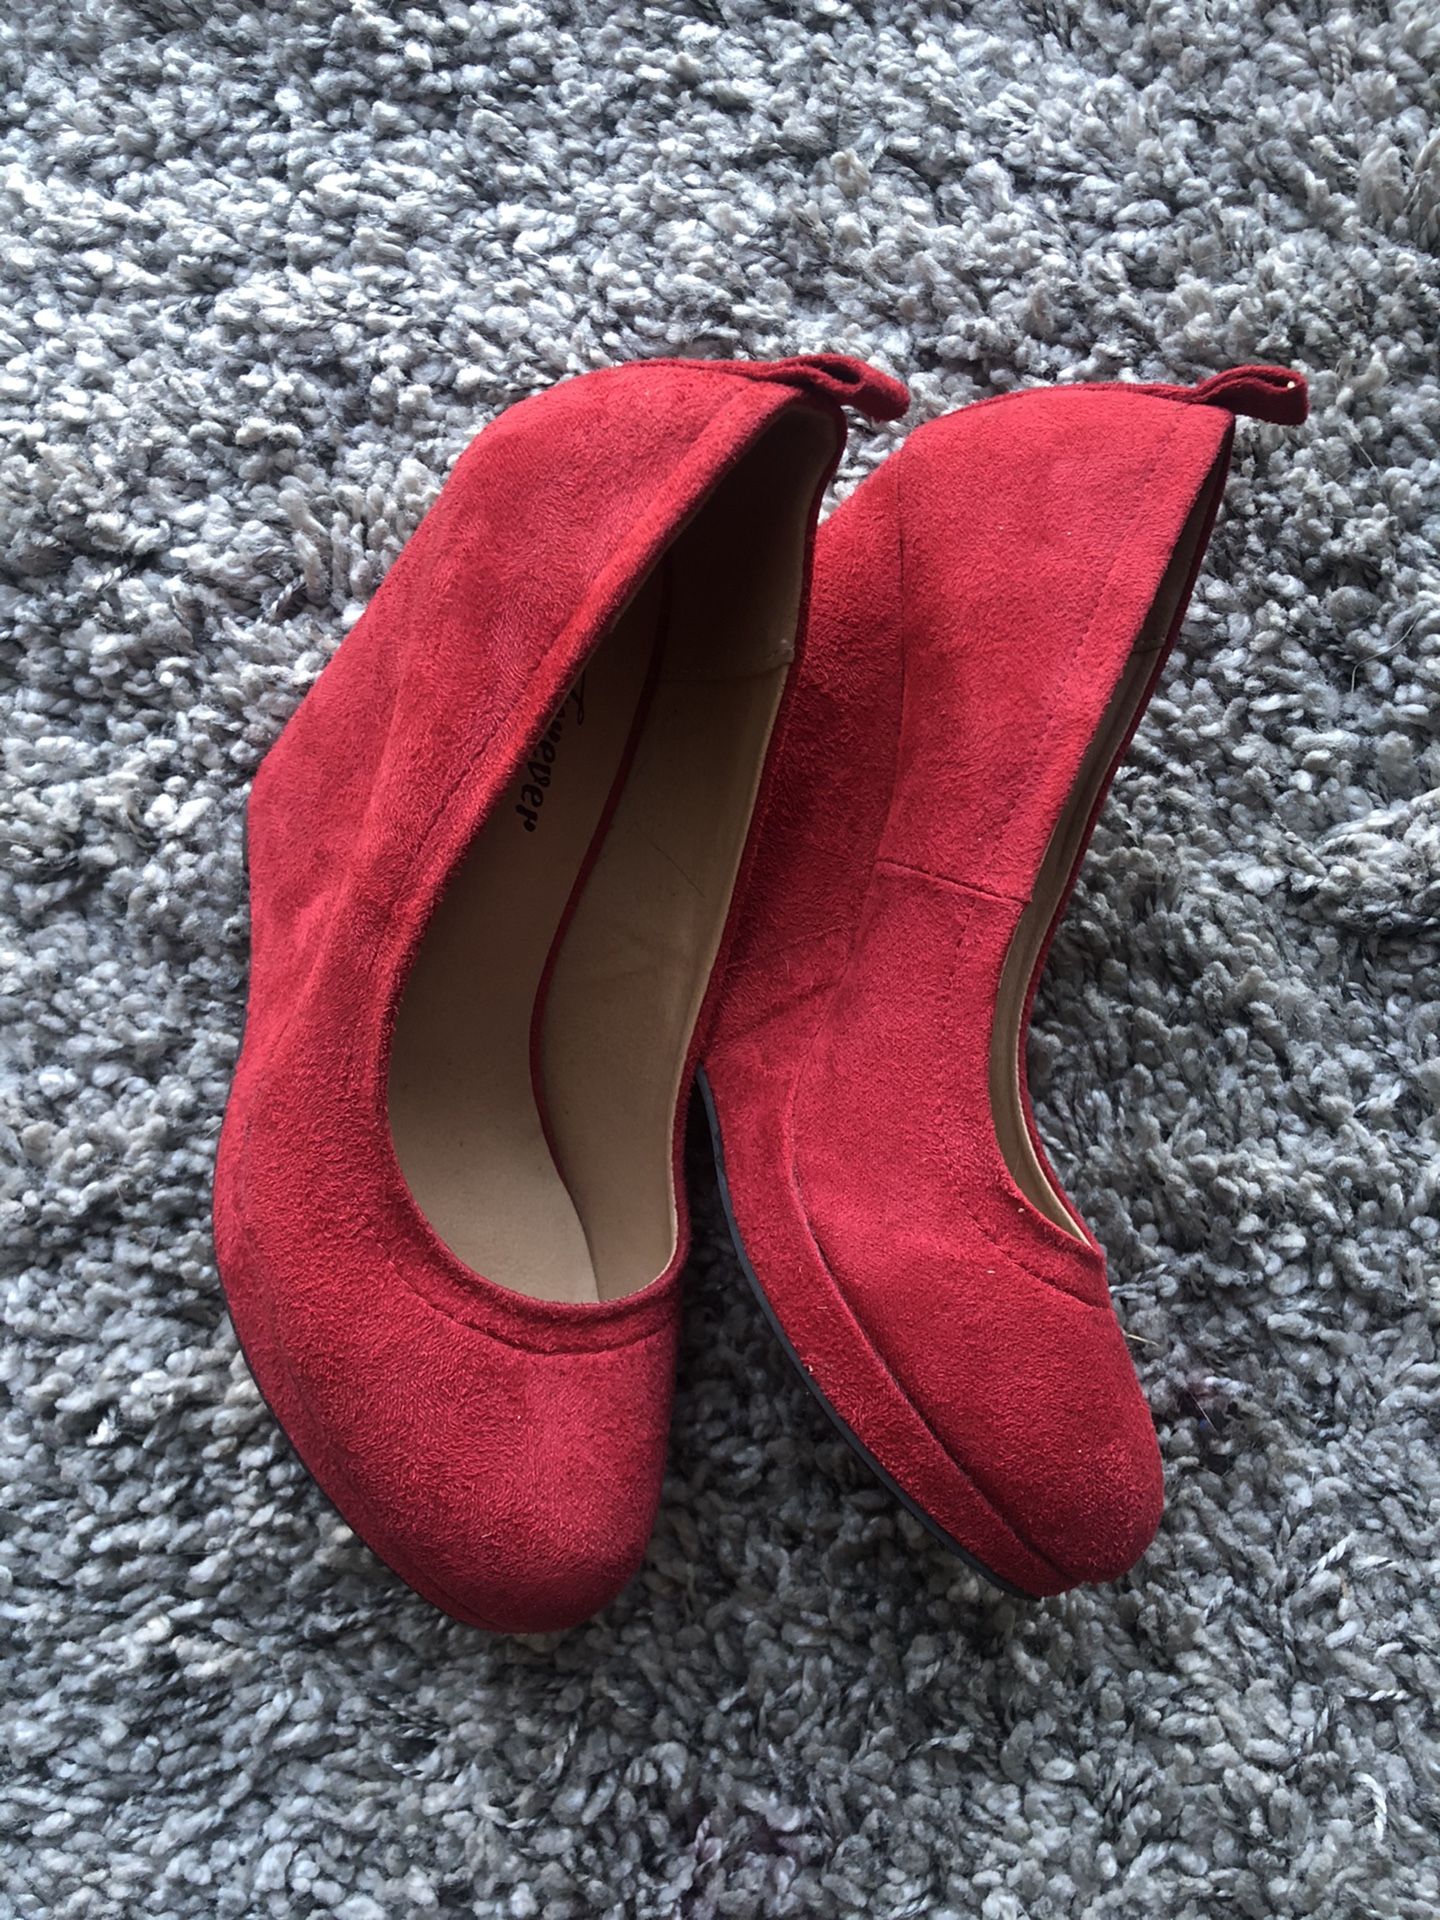 Red suede wedges